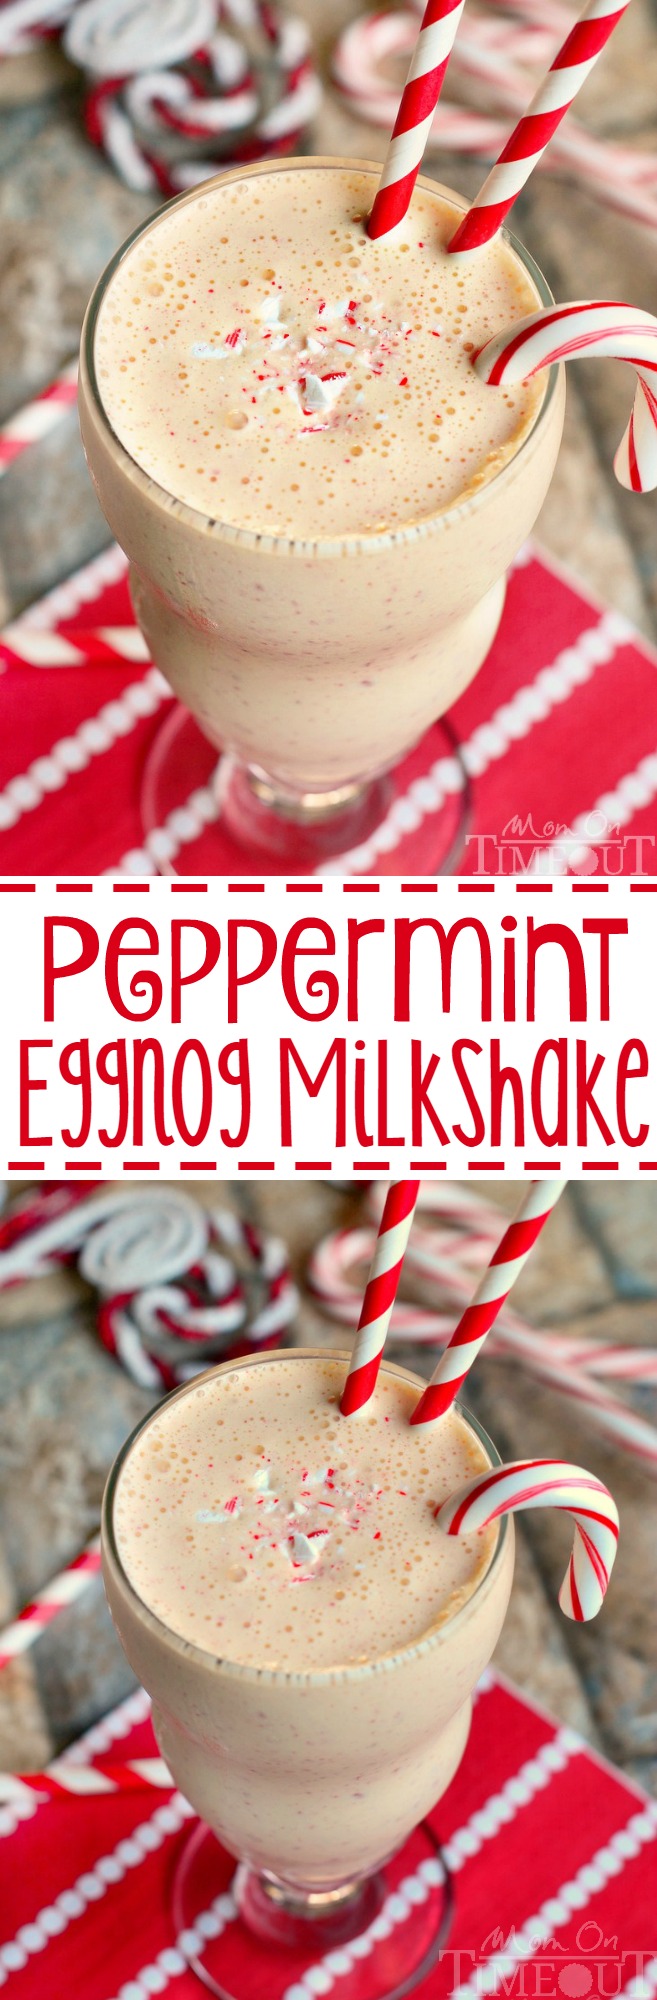 Two of my favorite holiday flavors come together magnificently in this exceptional Peppermint Eggnog Milkshake! An amazing drink for your next holiday or Christmas party! // Mom On Timeout